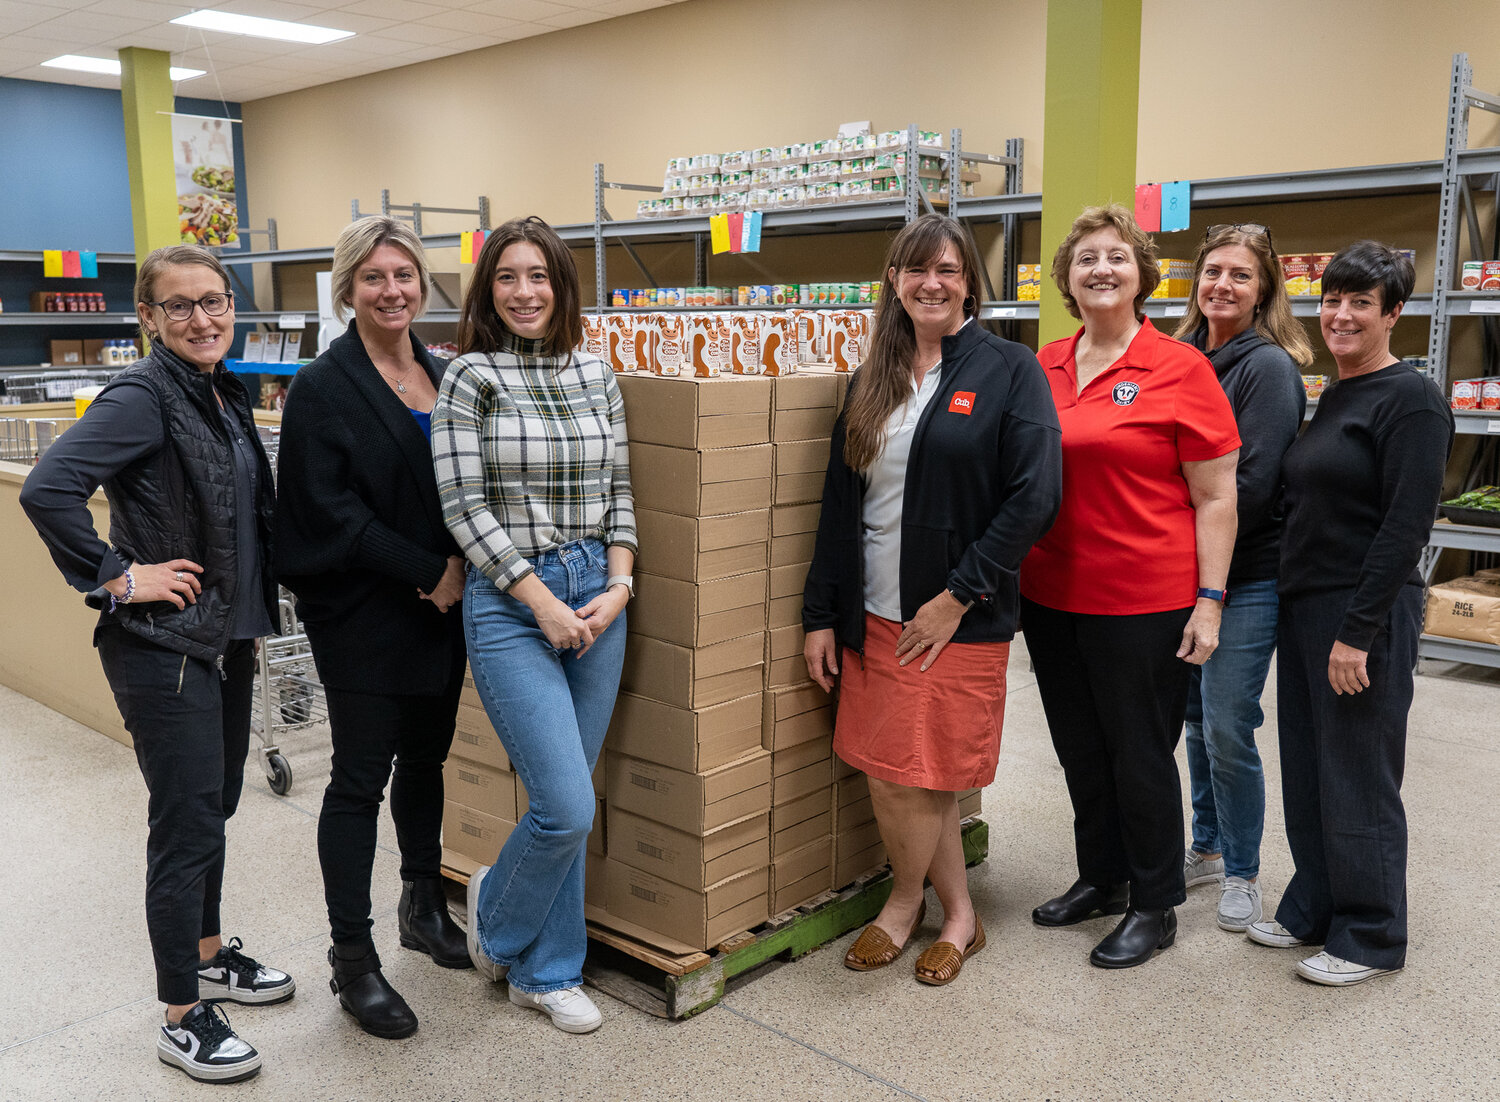 A group of representatives from Hastings Family Service, Cub and the Dairy Farmers of America pause in front of one of the pallets of Giving Cow milk that is stationed inside of the food pantry at Hastings Family Service. The chocolate milk will be a welcome, special treat for families this holiday season. L to R Amy Schaffer, Christina Taylor-Haley, Jayme Harlander, Tara Tommes, Janet Bremer, Amy Sutton and Deana Dunning.